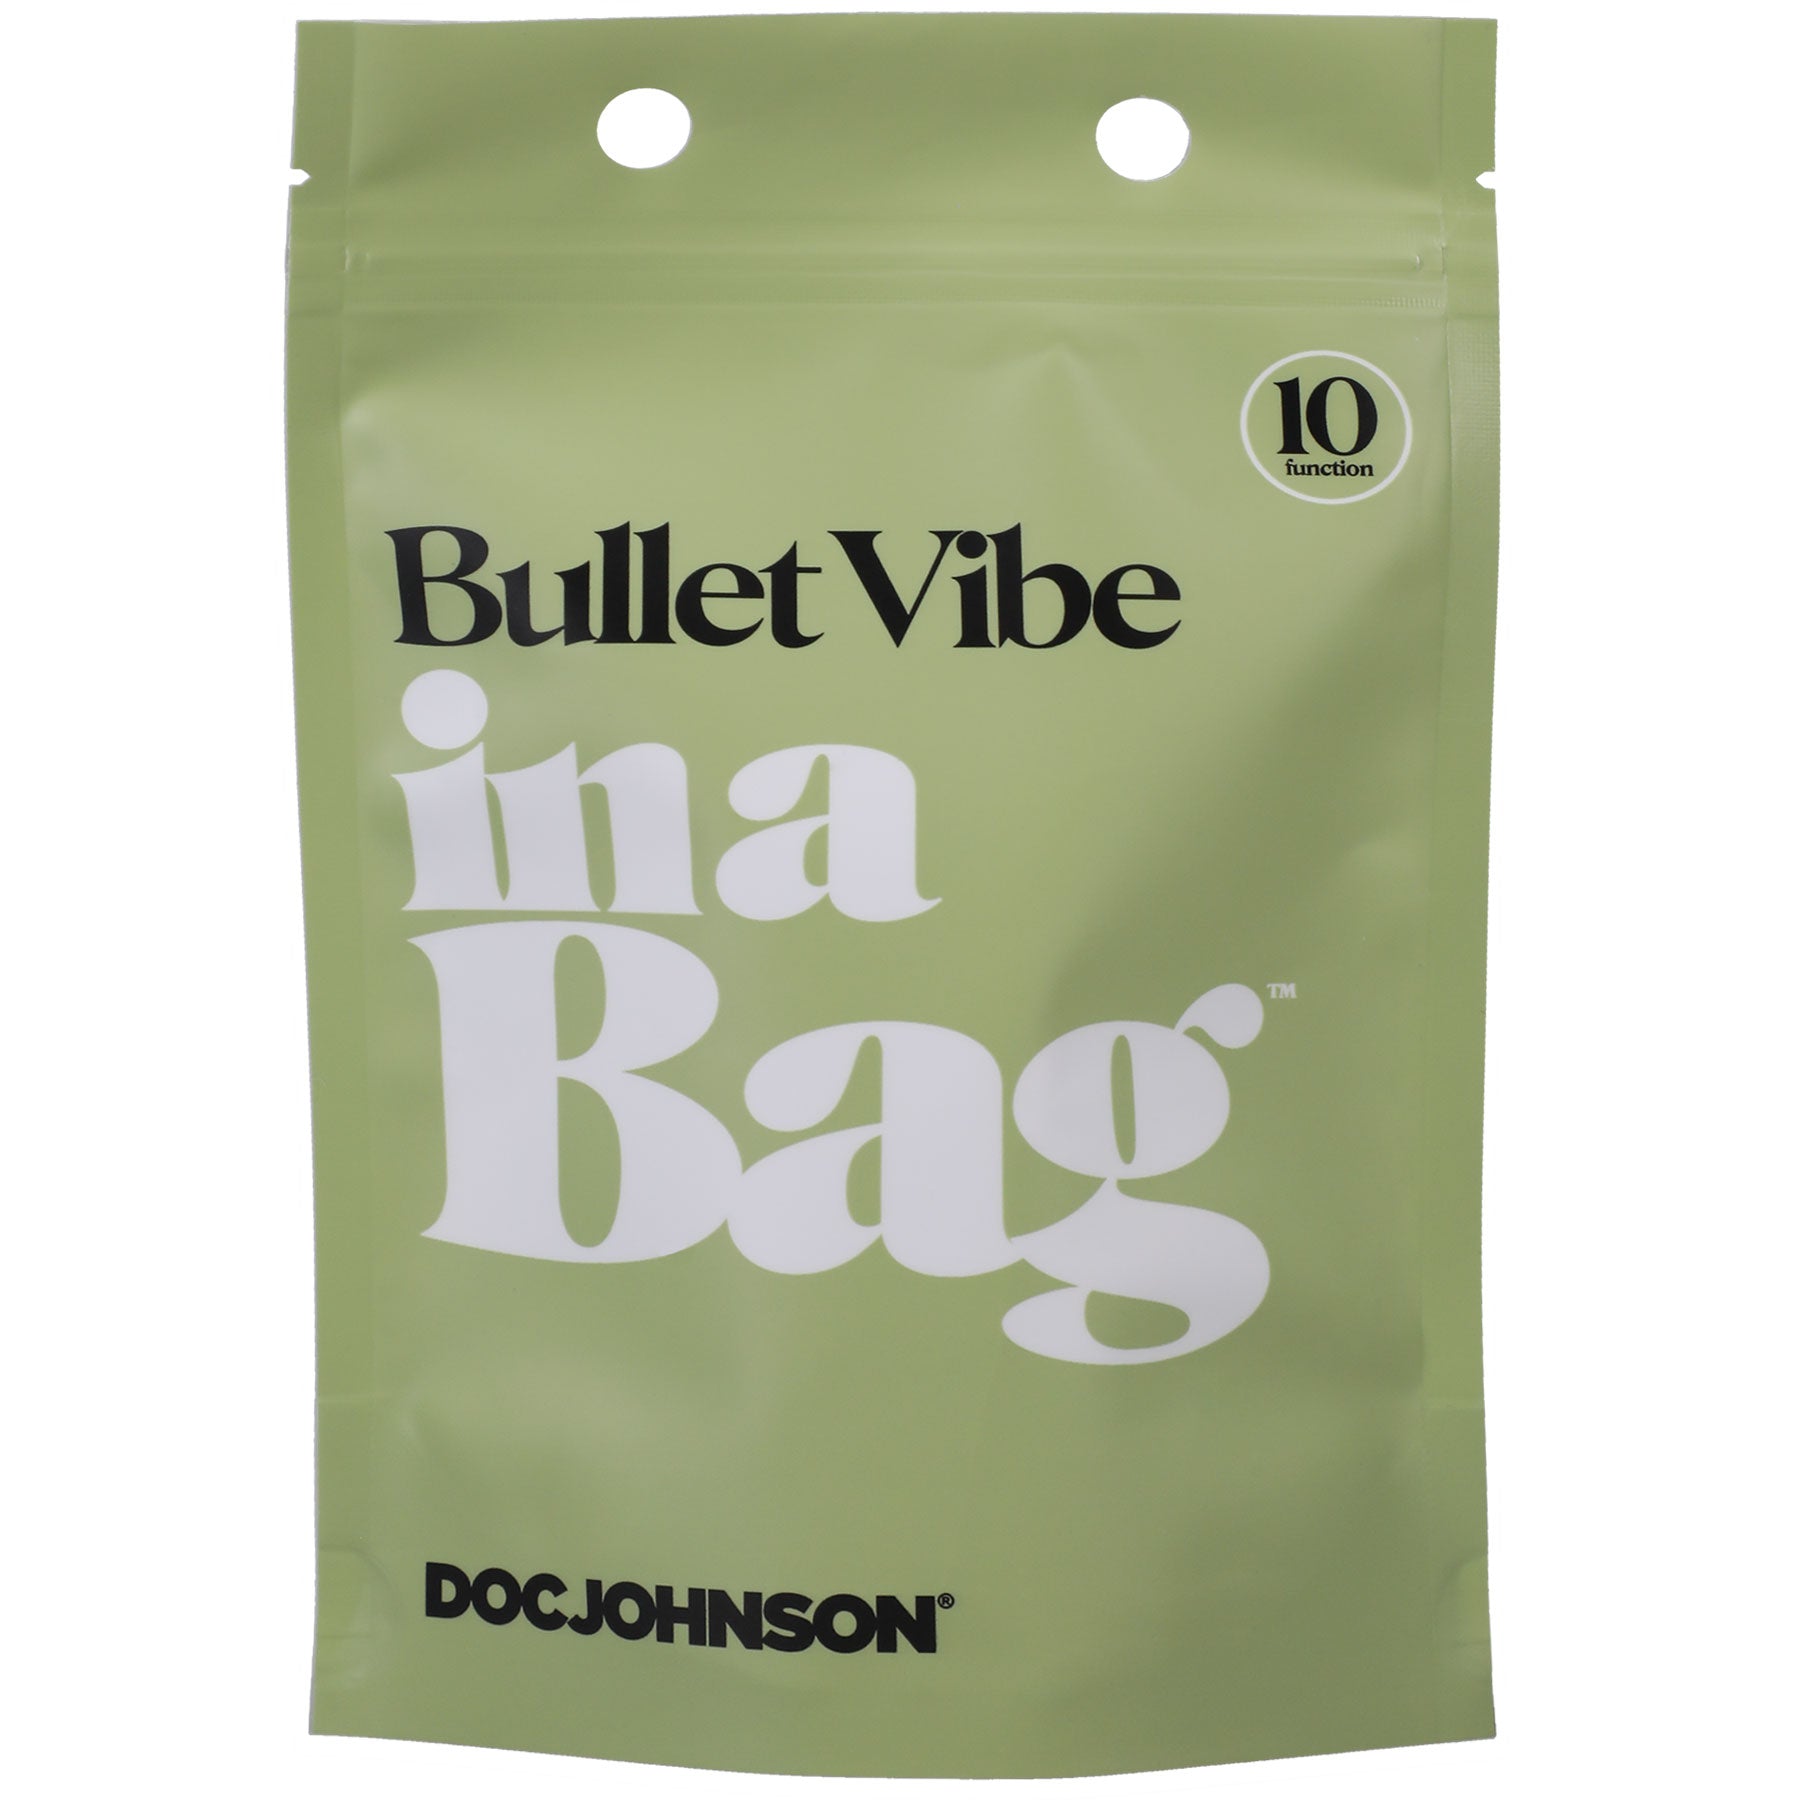 Pulsating Patterns With Bullet Vibrator in a Bag - Black